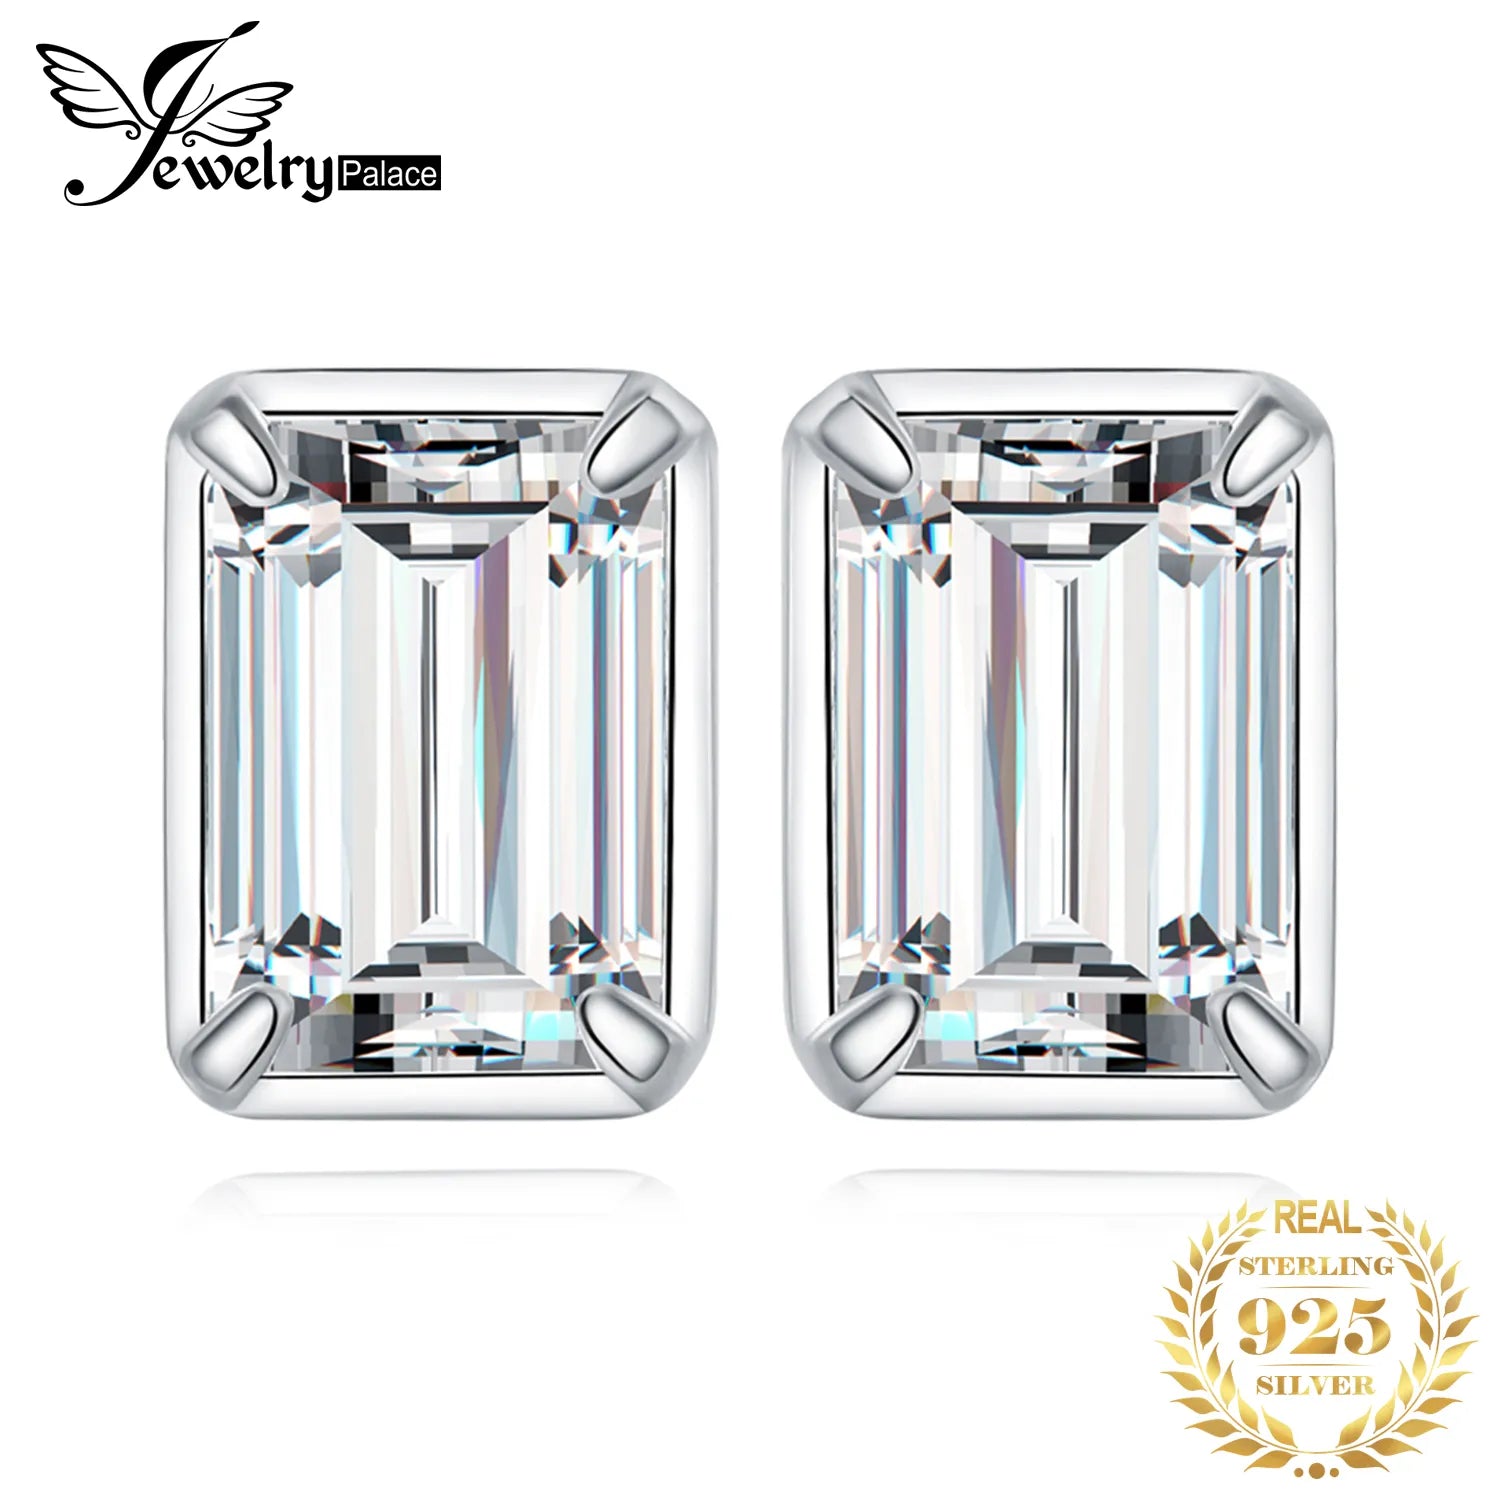 JewelryPalace Moissanite D Color 1.6ct/pair Emerald Cut 925 Sterling Silver Stud Earrings for Woman Yellow Rose Gold Plated